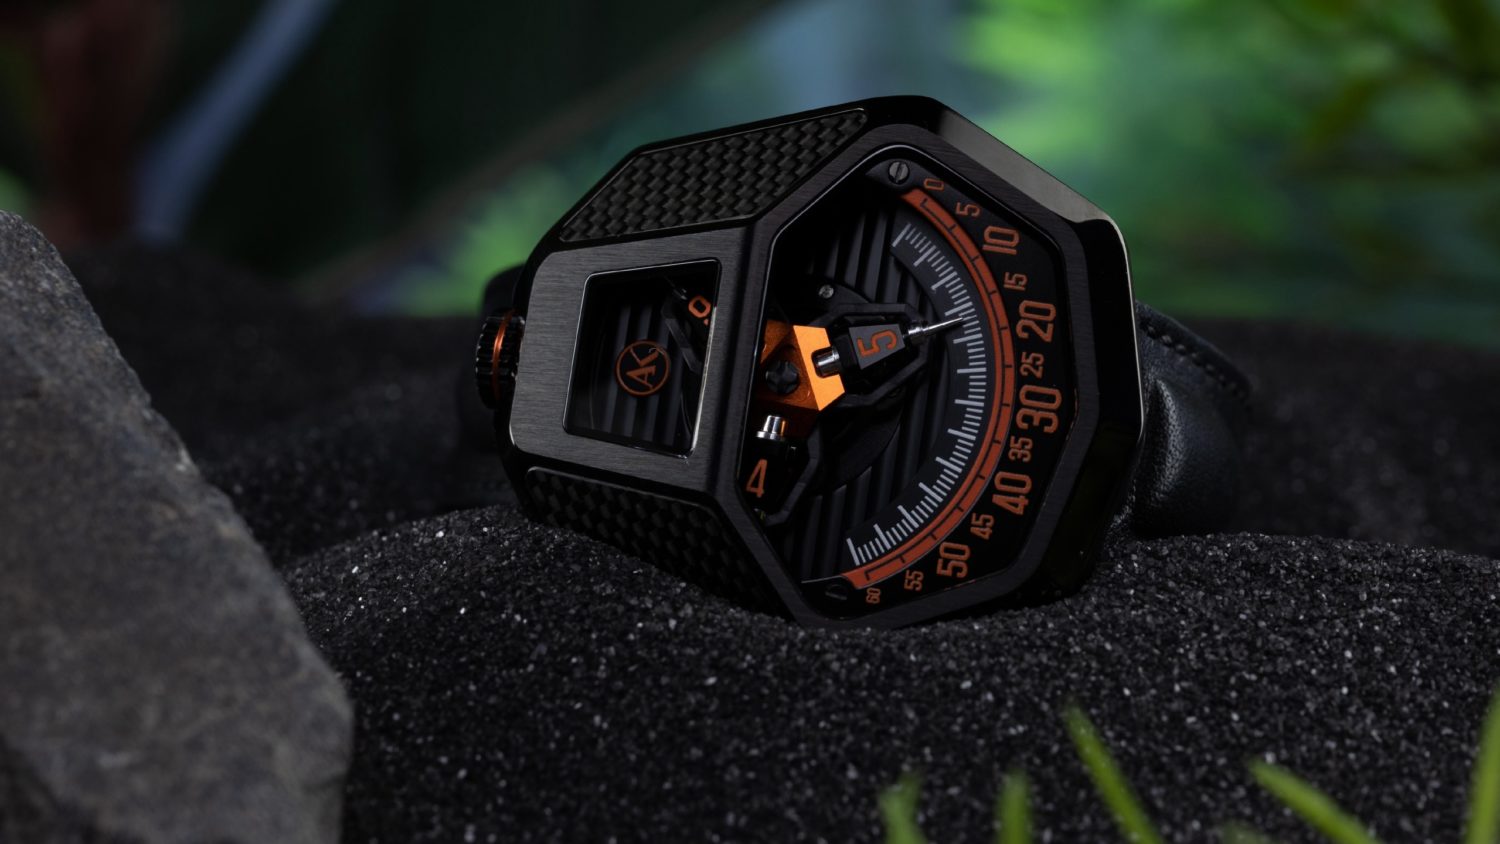 The Cobra series of watches draws inspiration from the cobra - the king of snakes. – ©Atowak